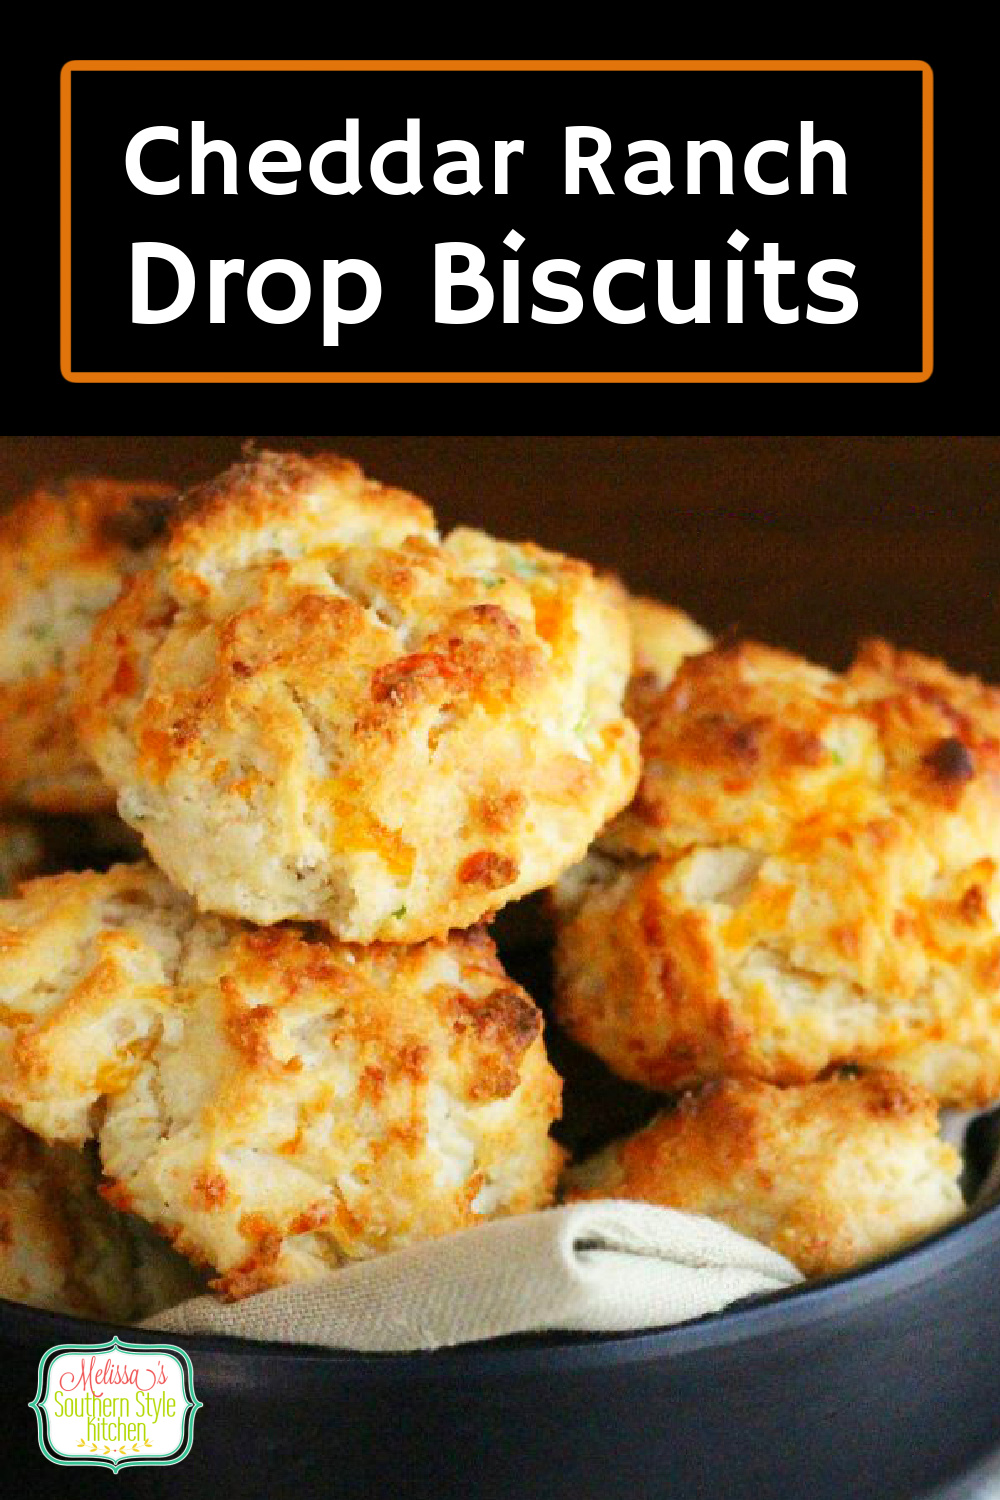 These cheddar-ranch infused drop biscuits require no rolling and cutting making them ideal for any meal #cheddarbiscuits #cheese #southernbiscuits #biscuitrecipes #dropbiscuits #cheddarranchdropbiscuits #brunch #breakfast #southernfood #southernrecipes #holidaybrunch